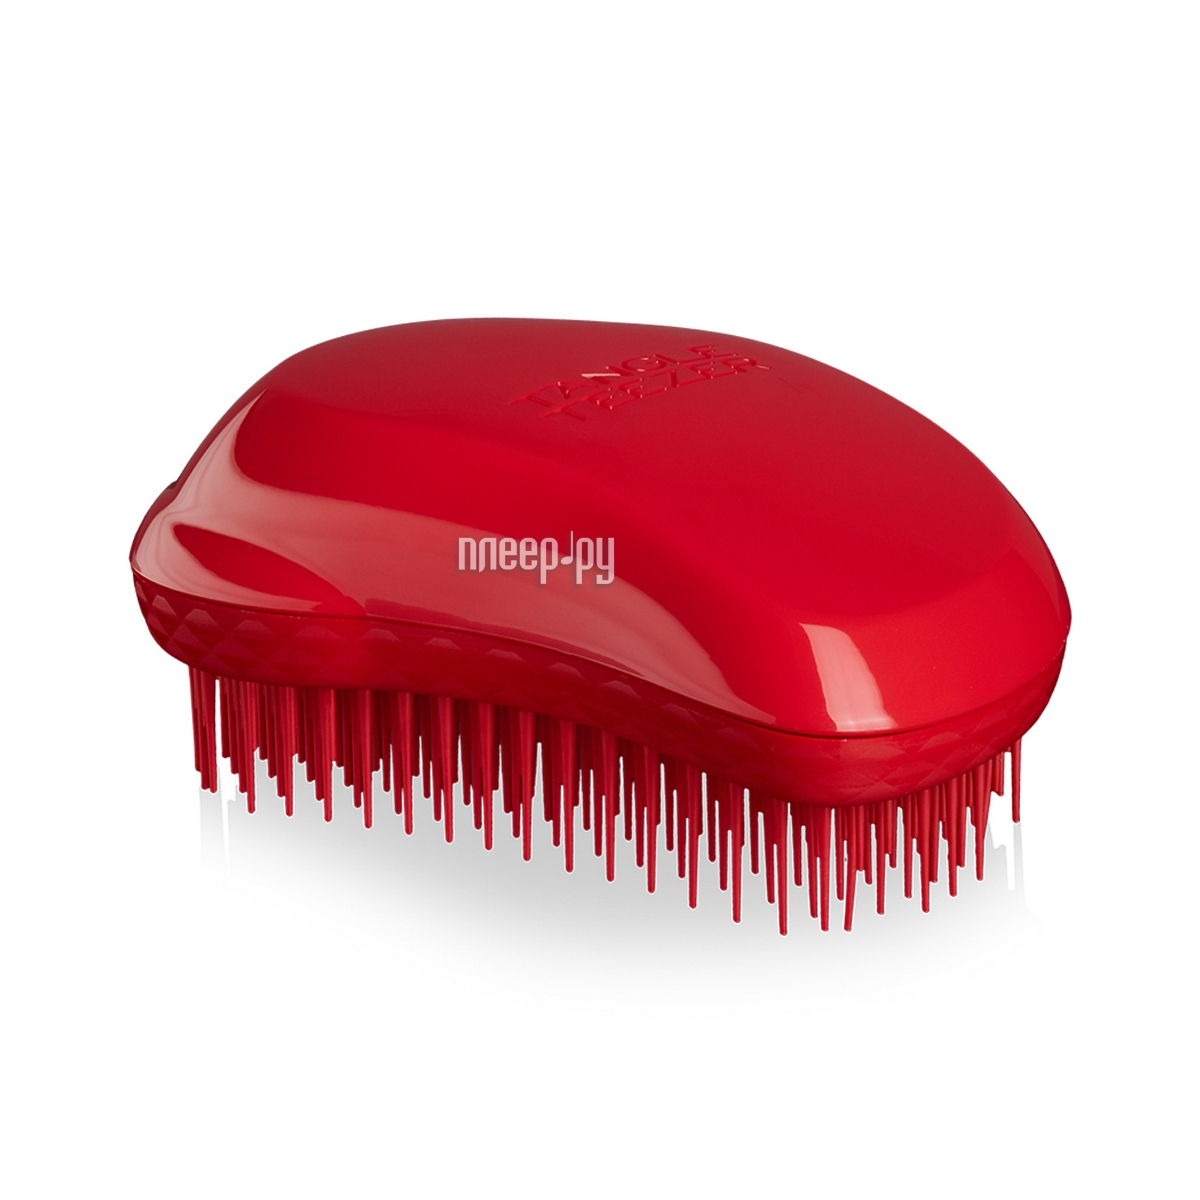  Tangle Teezer Thick & Curly Salsa Red  725 